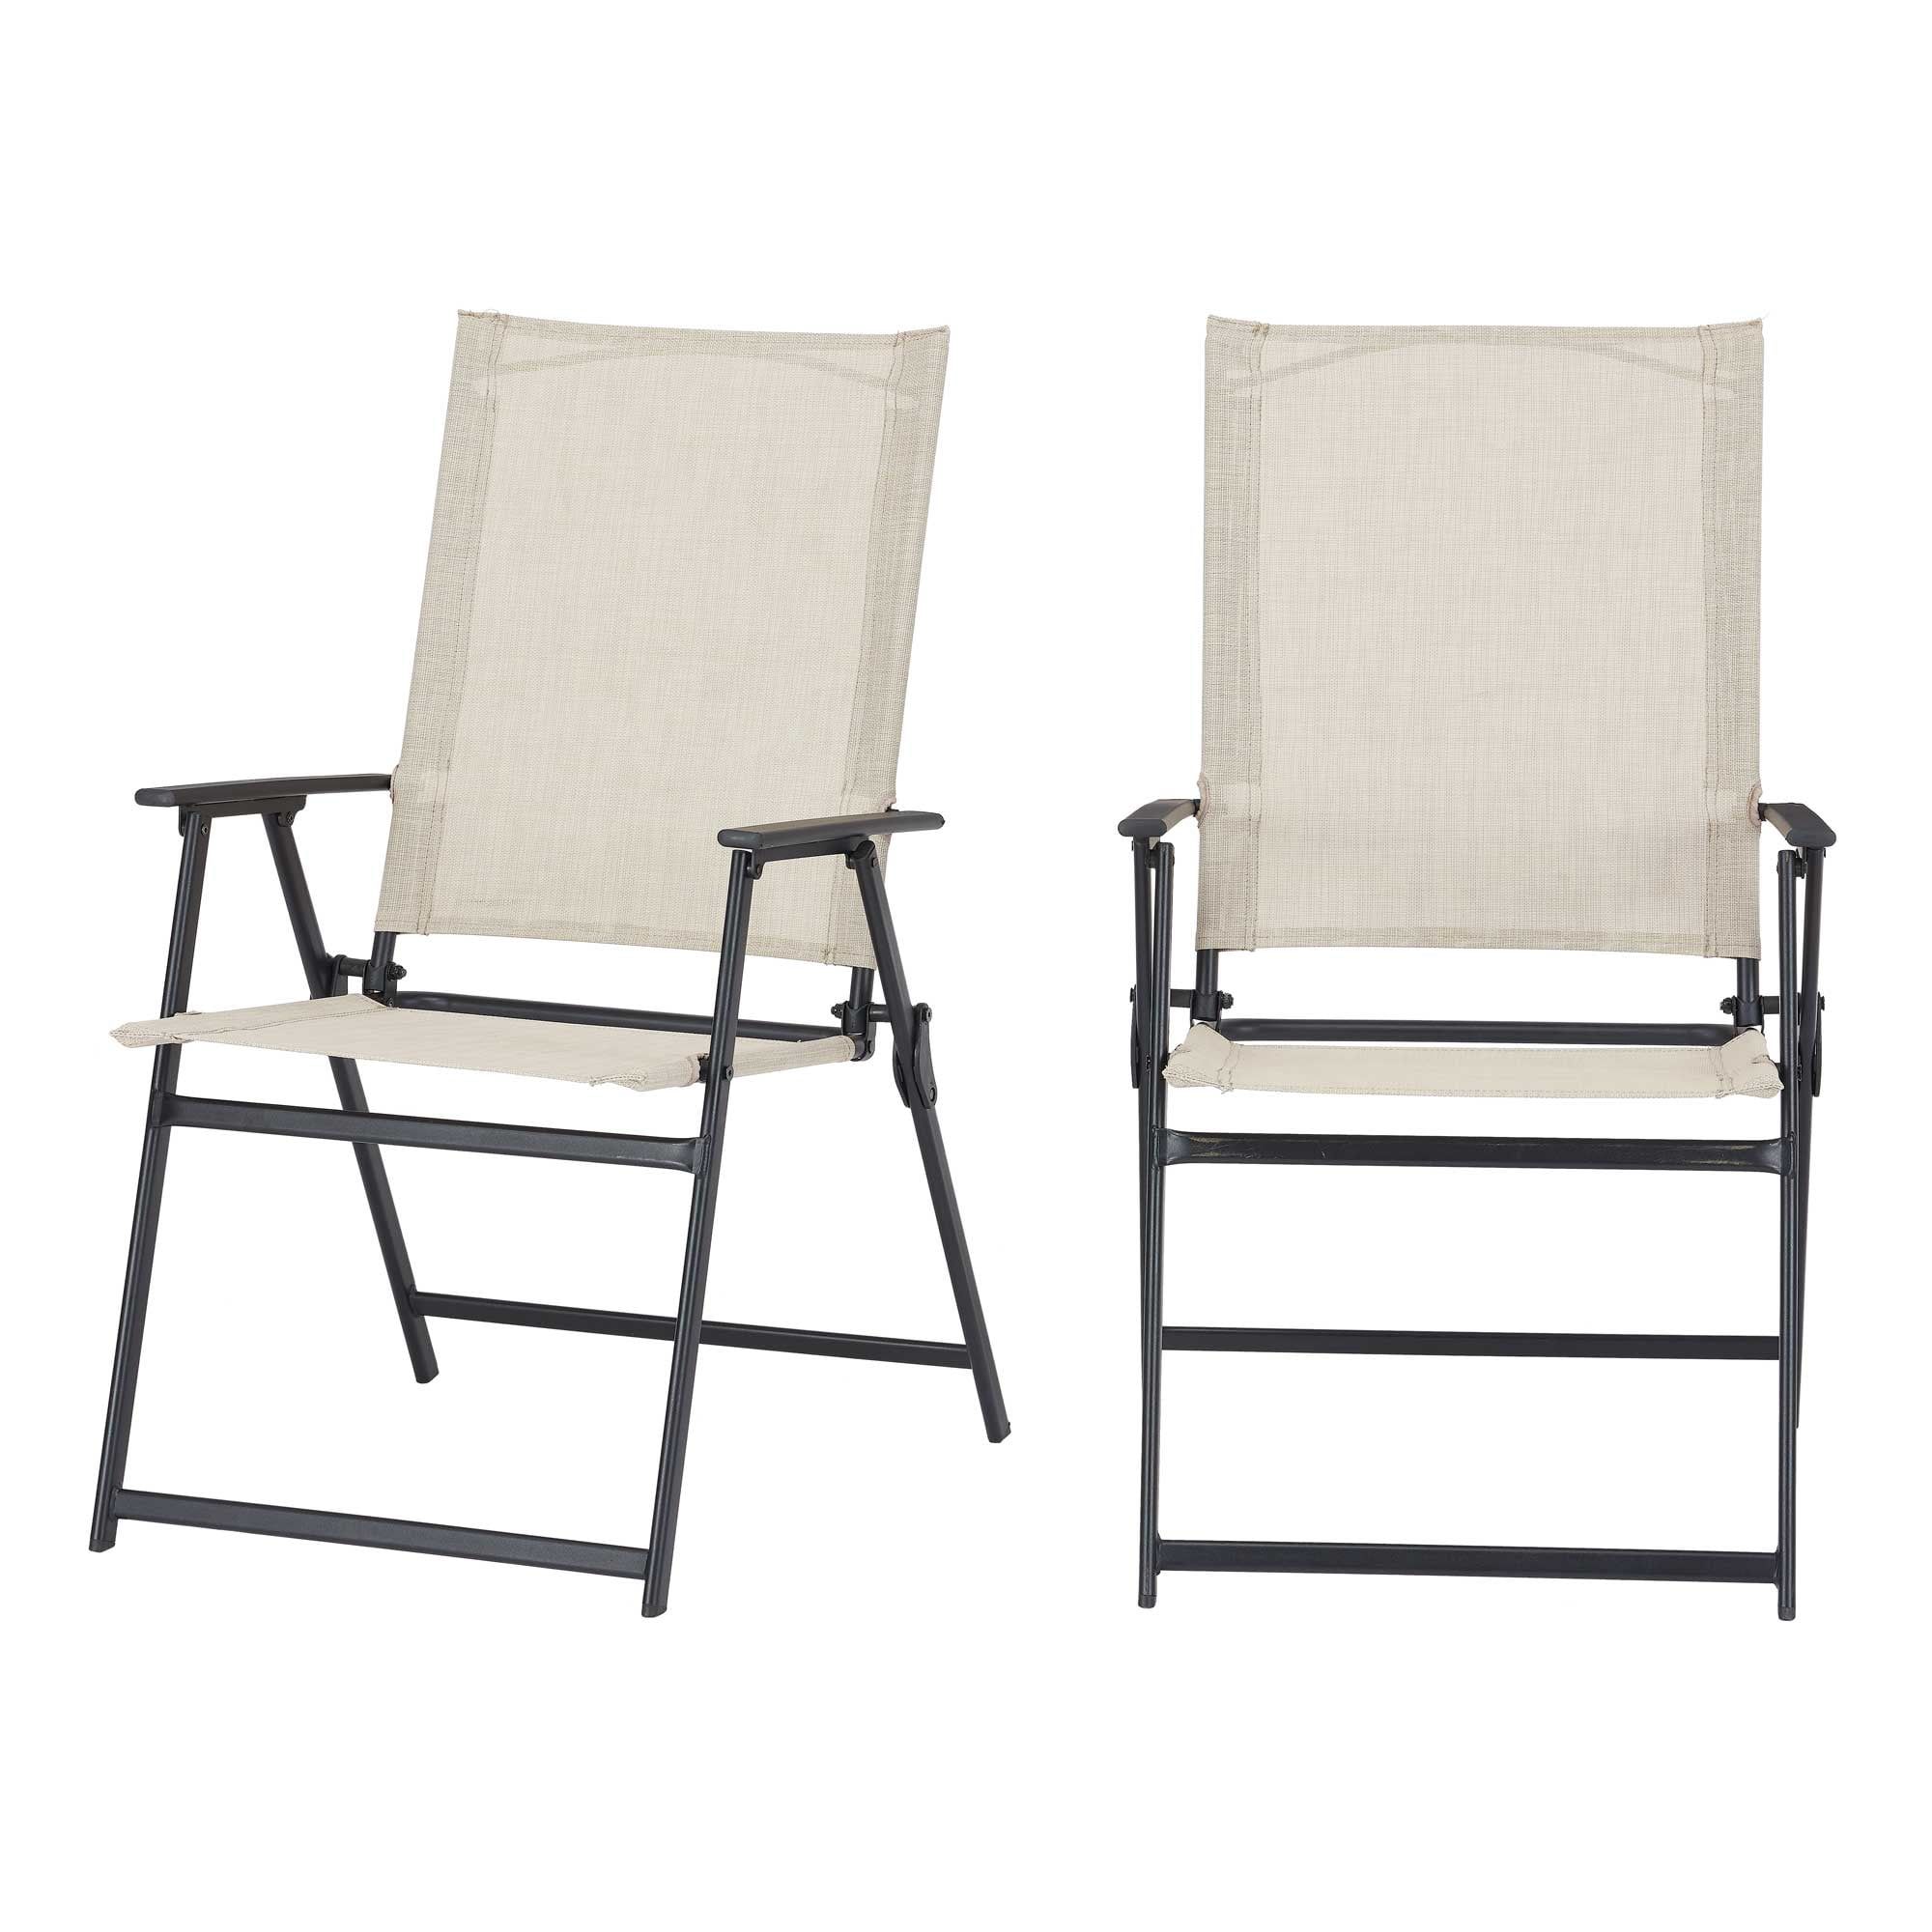 Mainstays Greyson Square Set of 2 Outdoor Patio Steel Sling Folding Chair, Beige | Walmart (US)